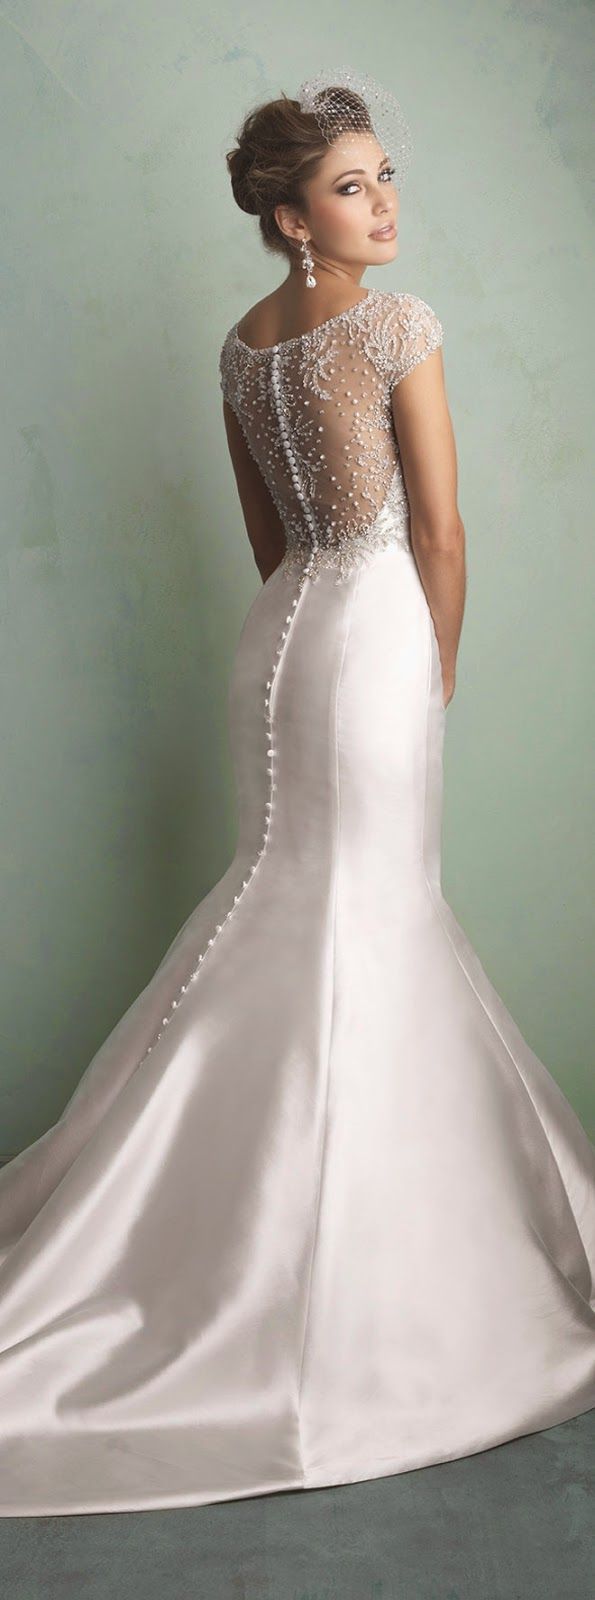 Свадьба - Buttons Down The Back: Sophisticated Wedding Gowns